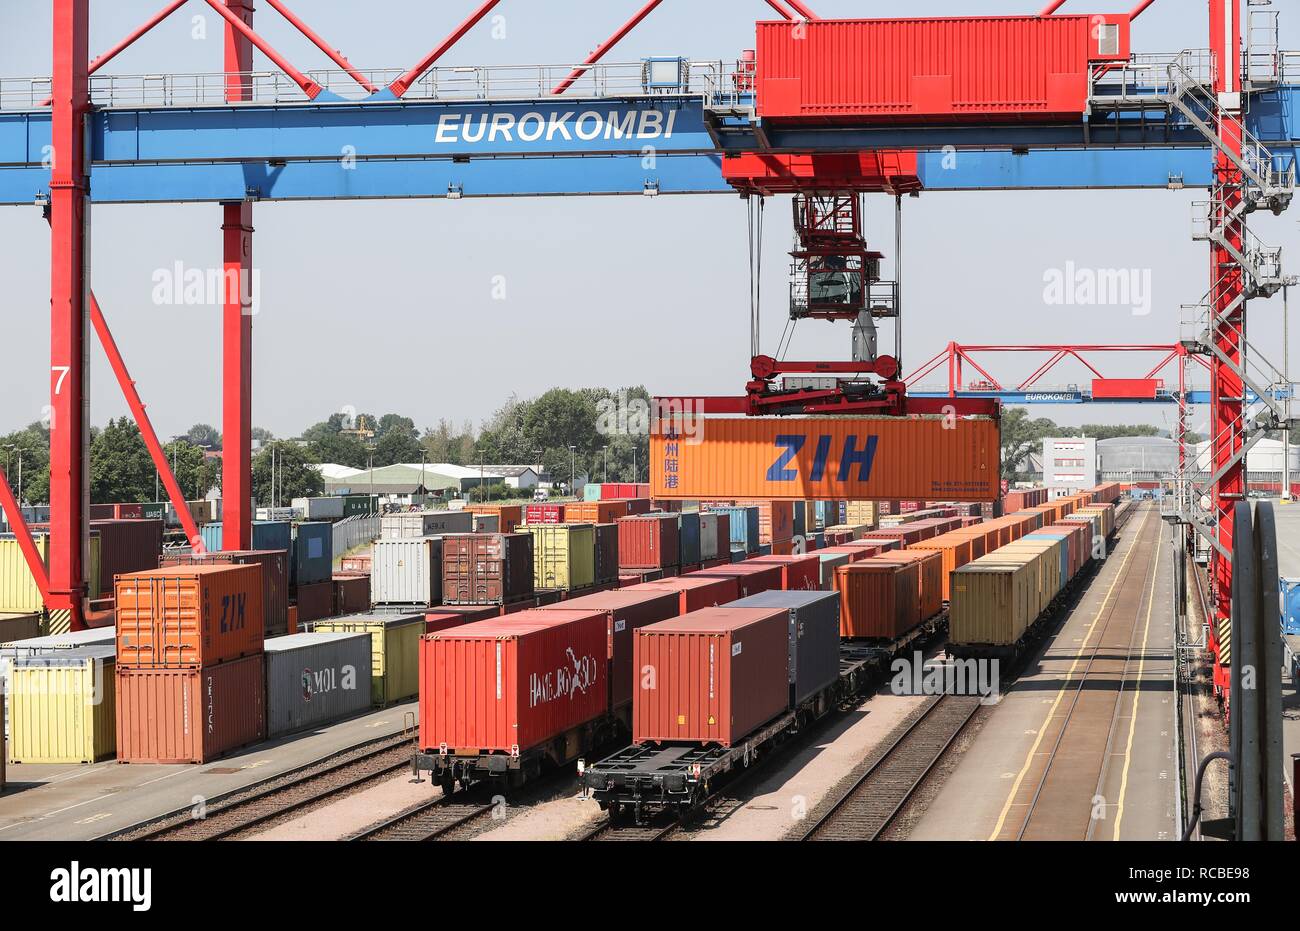 (190115) -- BEIJING, Jan. 15, 2019 (Xinhua) -- A cargo container on a China Railway Express train is unloaded at Eurokombi terminal in Hamburg, Germany, on May 29, 2018. China's foreign trade rose 9.7 percent year on year to a historic high of 30.51 trillion yuan (about 4.5 trillion U.S. dollars) in 2018, the General Administration of Customs (GAC) said Monday. Exports rose 7.1 percent year on year to 16.42 trillion yuan last year, while imports grew 12.9 percent to 14.09 trillion yuan, resulting in a trade surplus of 2.33 trillion yuan, which narrowed by 18.3 percent. Exports and impo Stock Photo